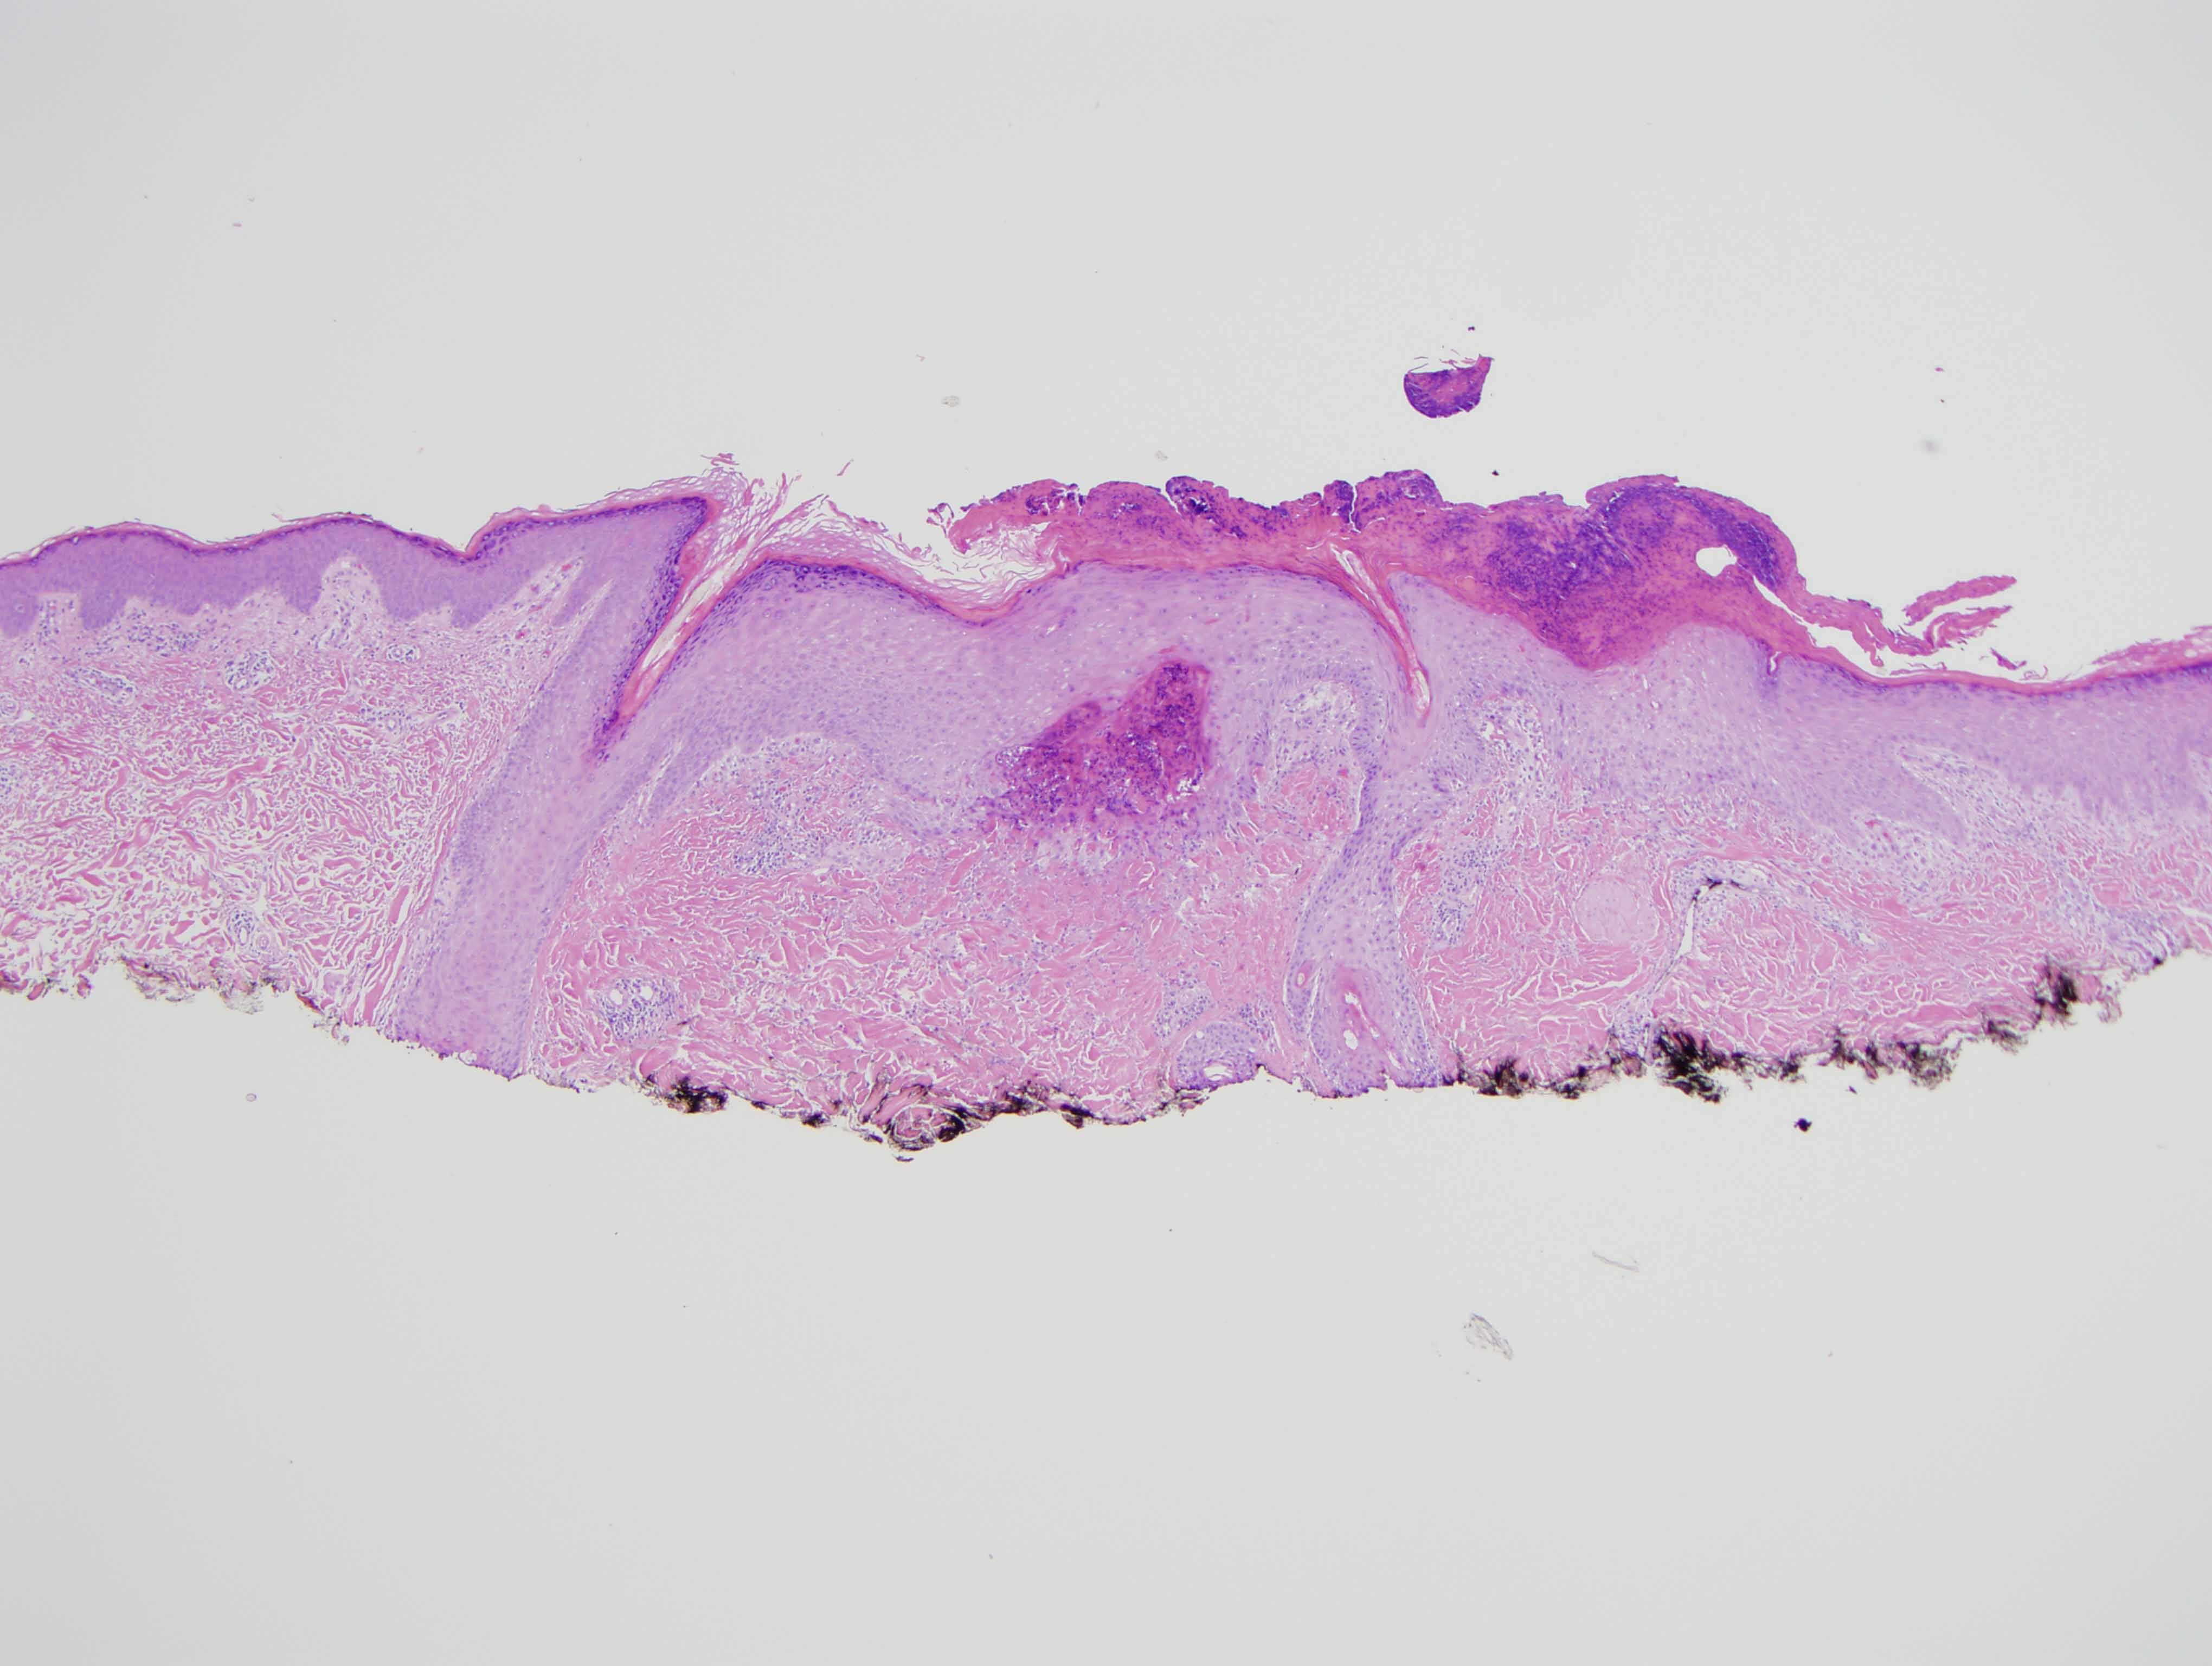 Slide 1: The biopsy shows an area of trauma whereby the epidermis is surmounted by a scale that is heavily imbued with neutrophils and fibrin. There is subepidermal fibrosis and hemorrhage.